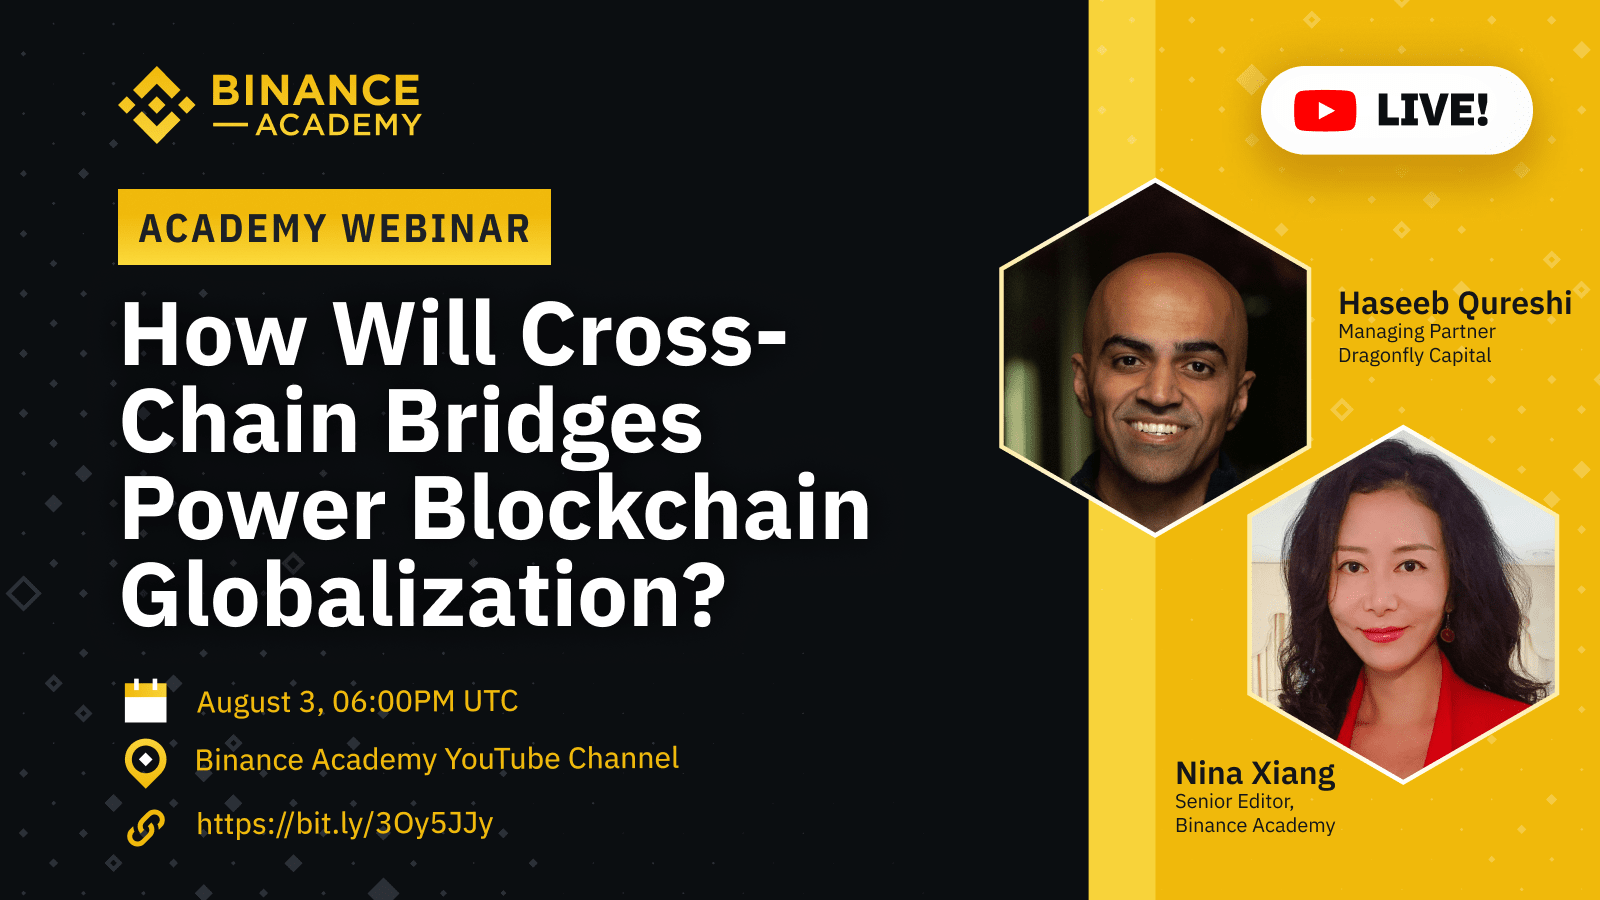 How Will Cross-Chain Bridges Power Blockchain Globalization -With Dragonfly Capital's Haseeb Qureshi